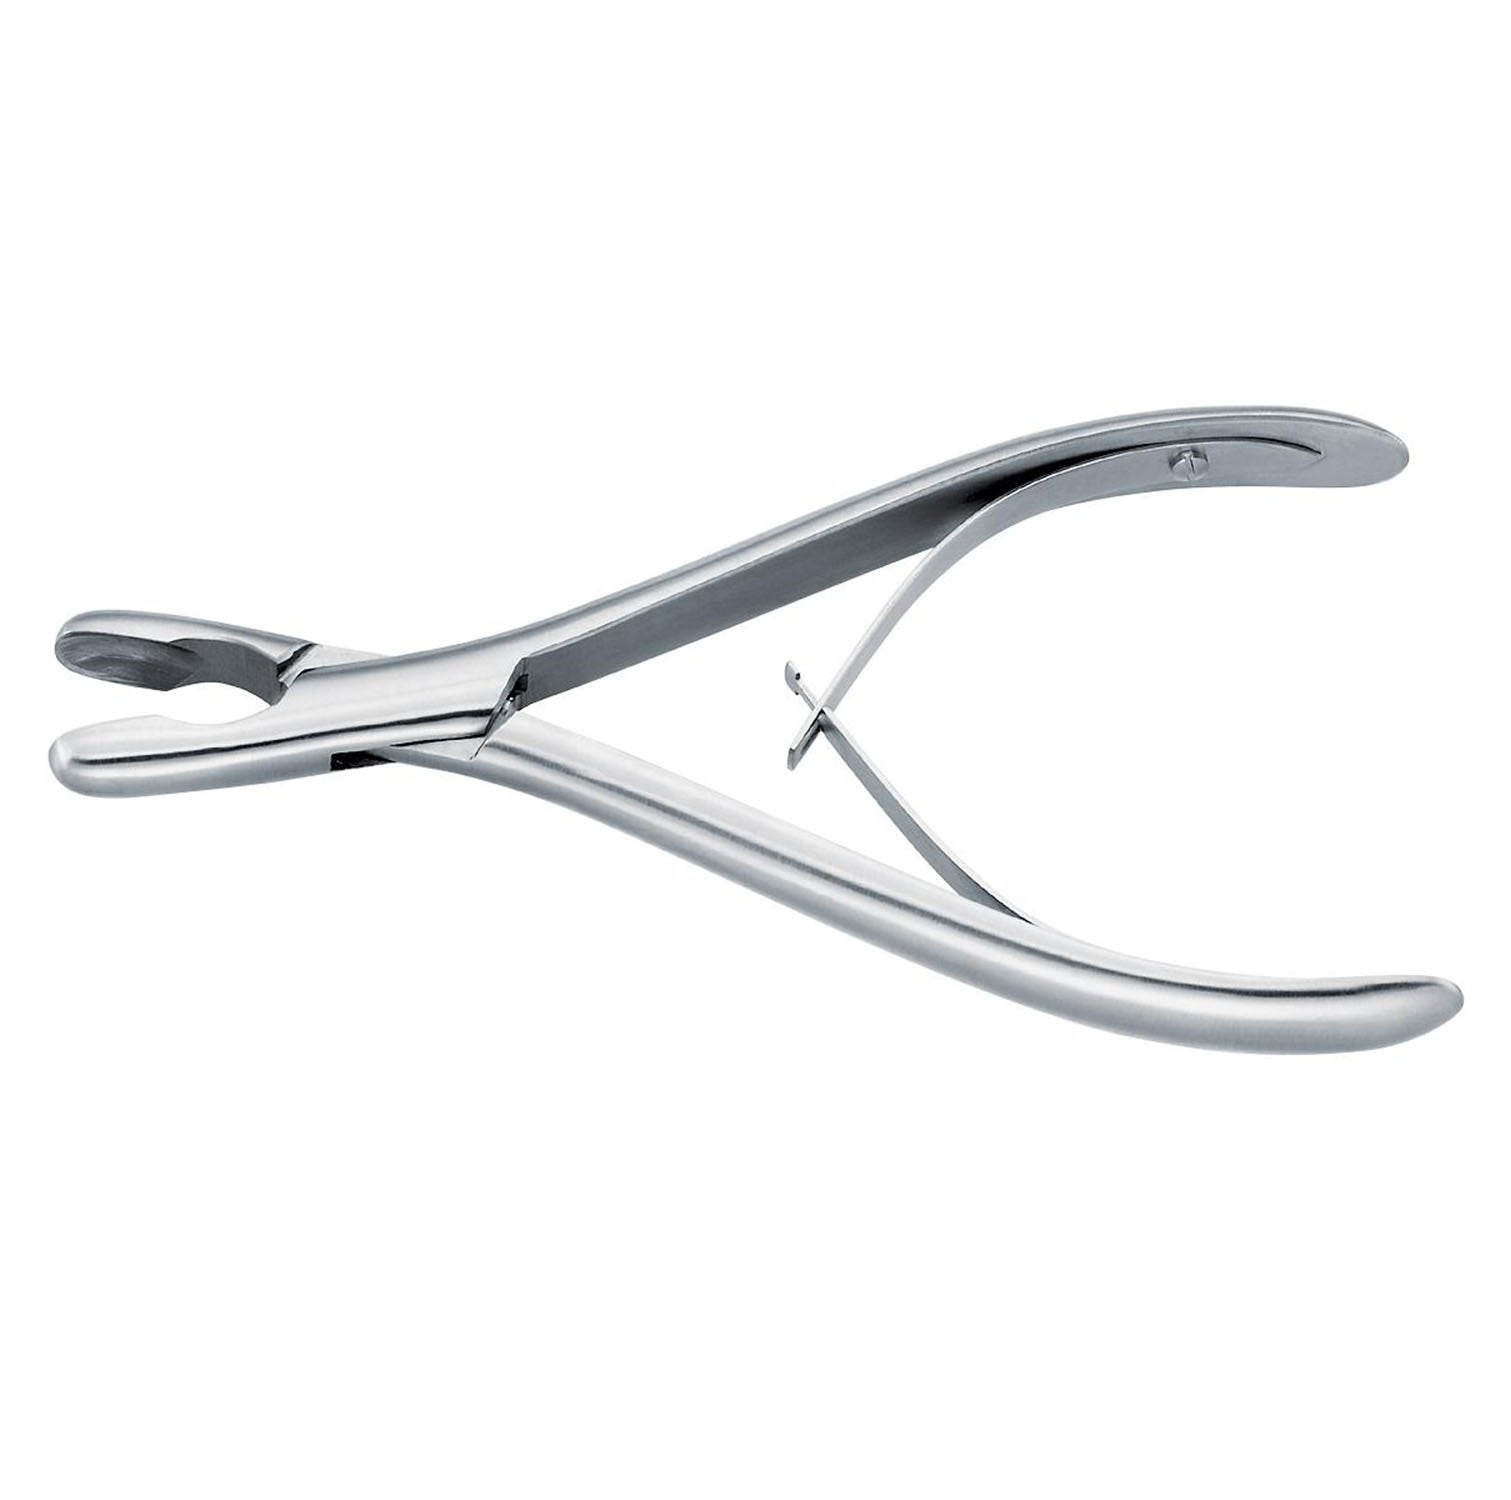 Luer-whiting Rongeur Forceps